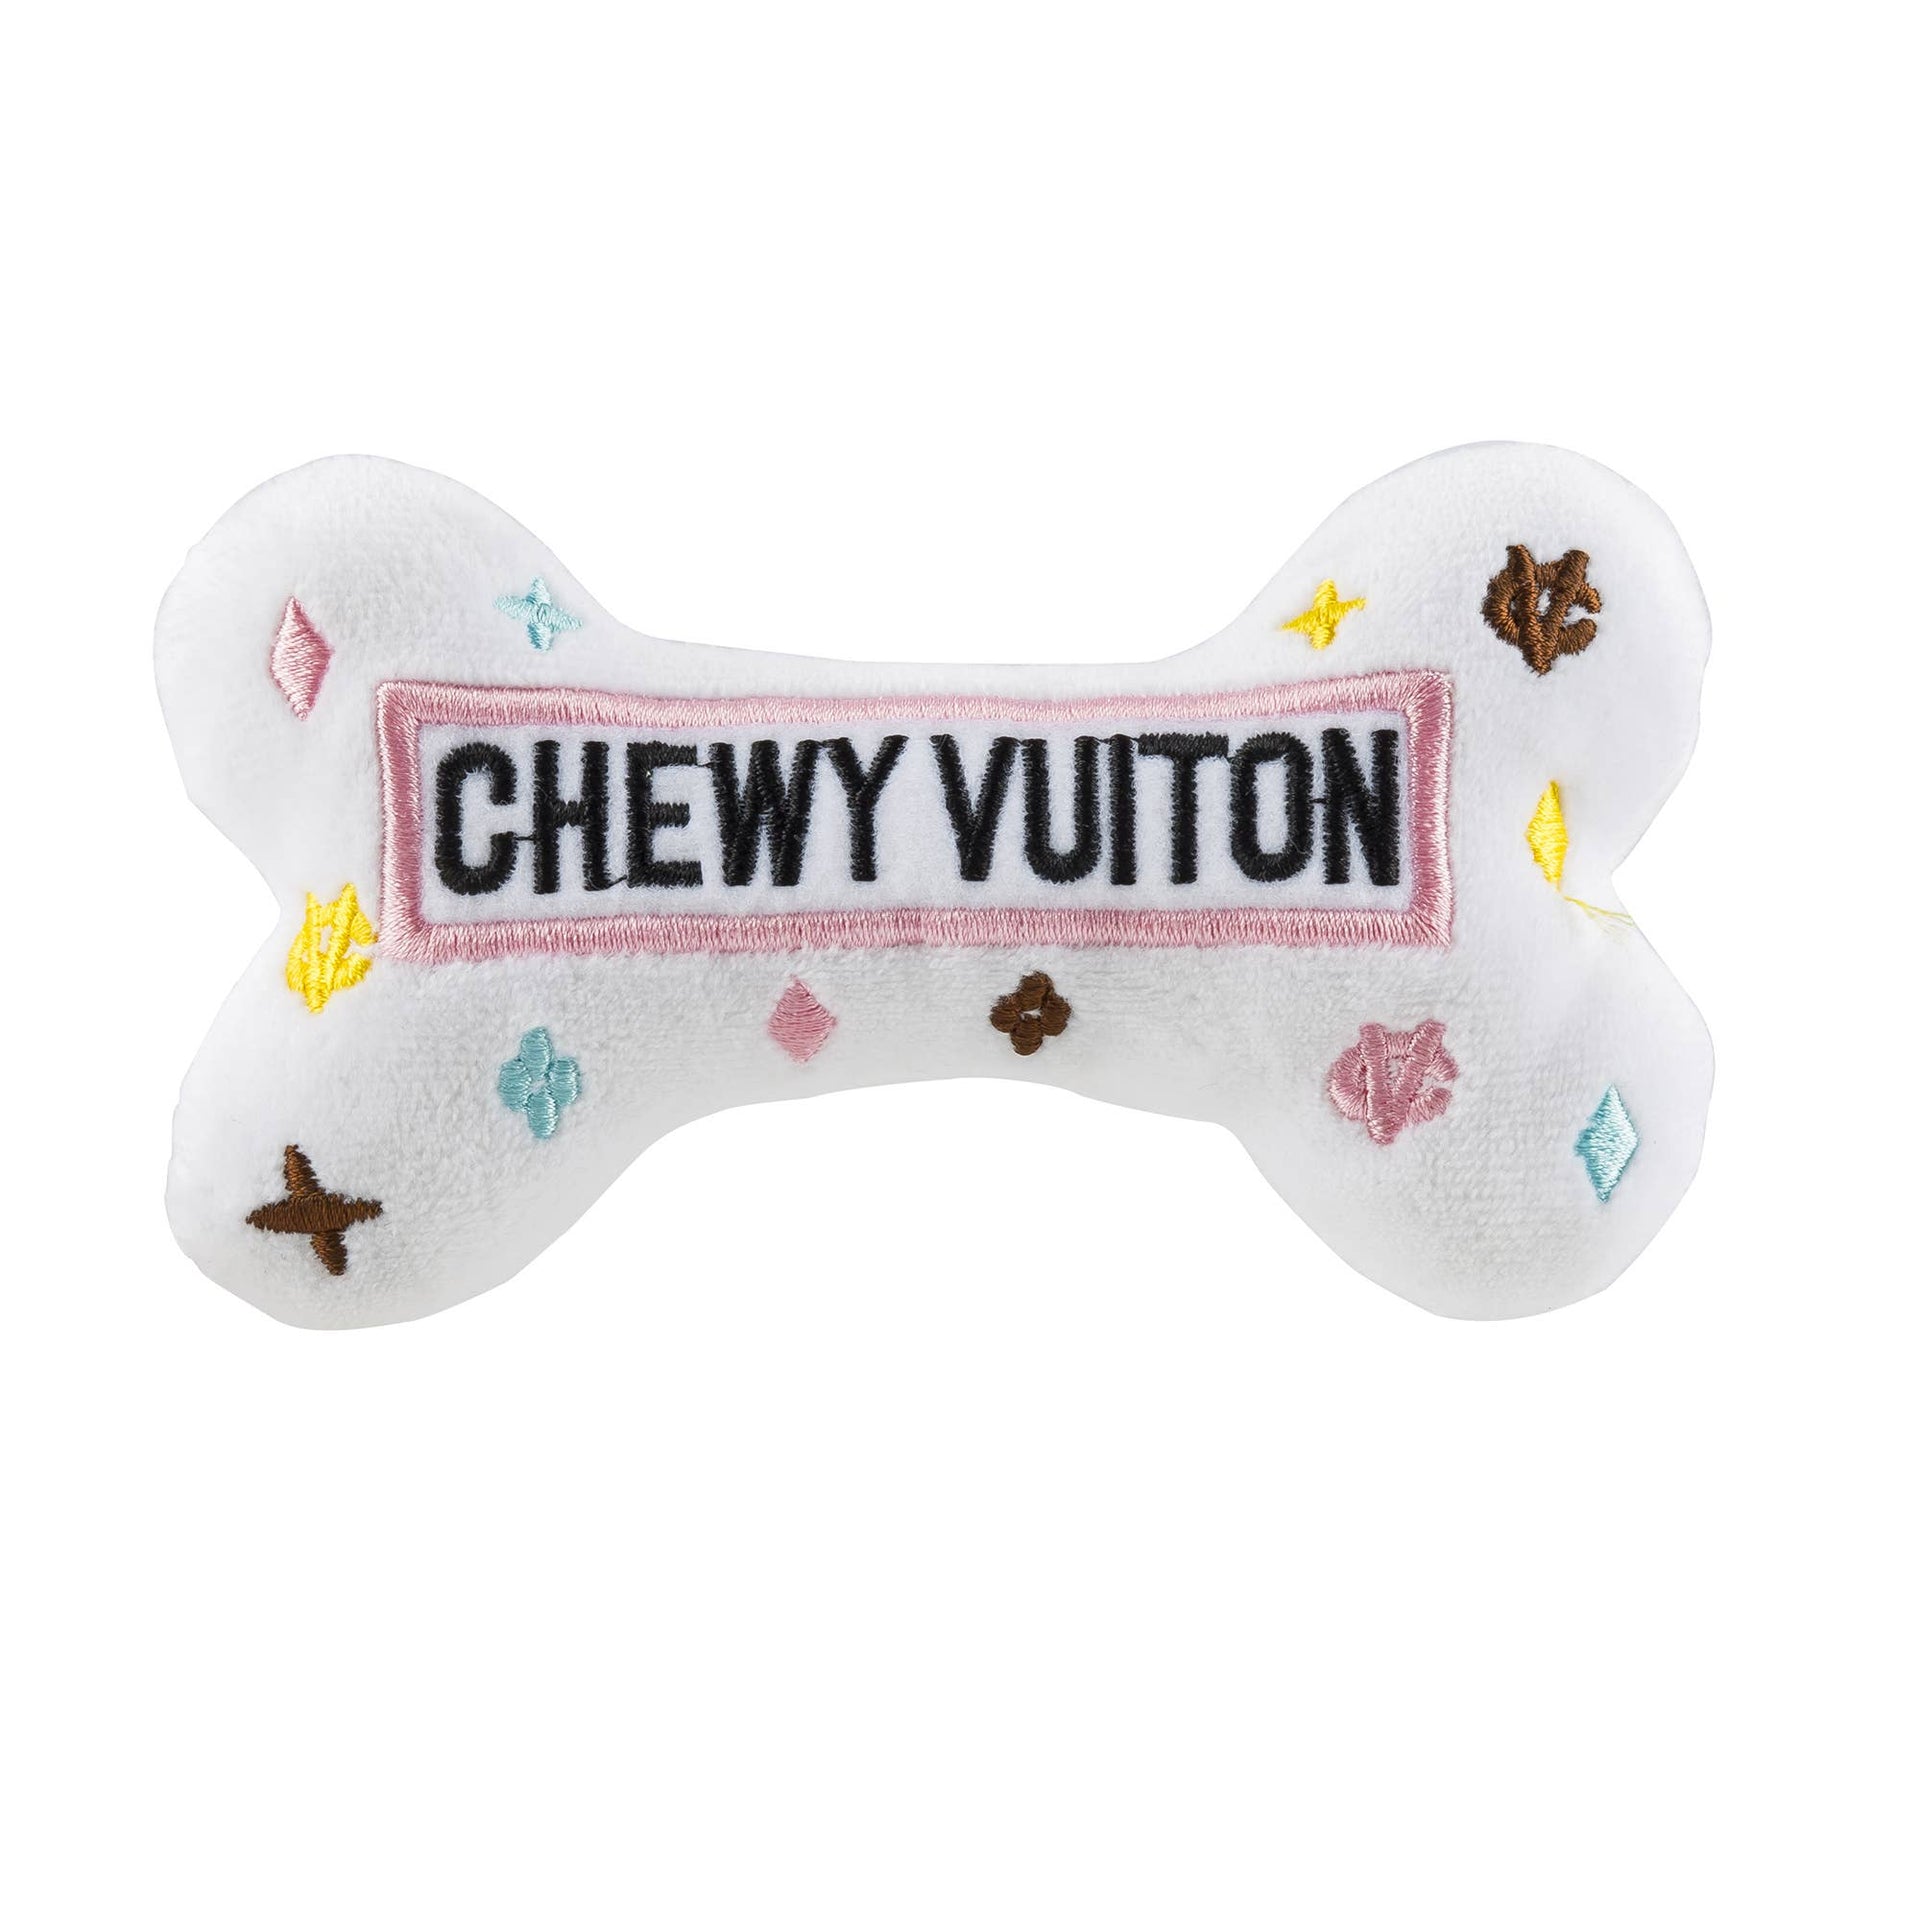 White Chewy Vuiton Bones Squeaker Dog Toy  Haute Diggity Dog Large  